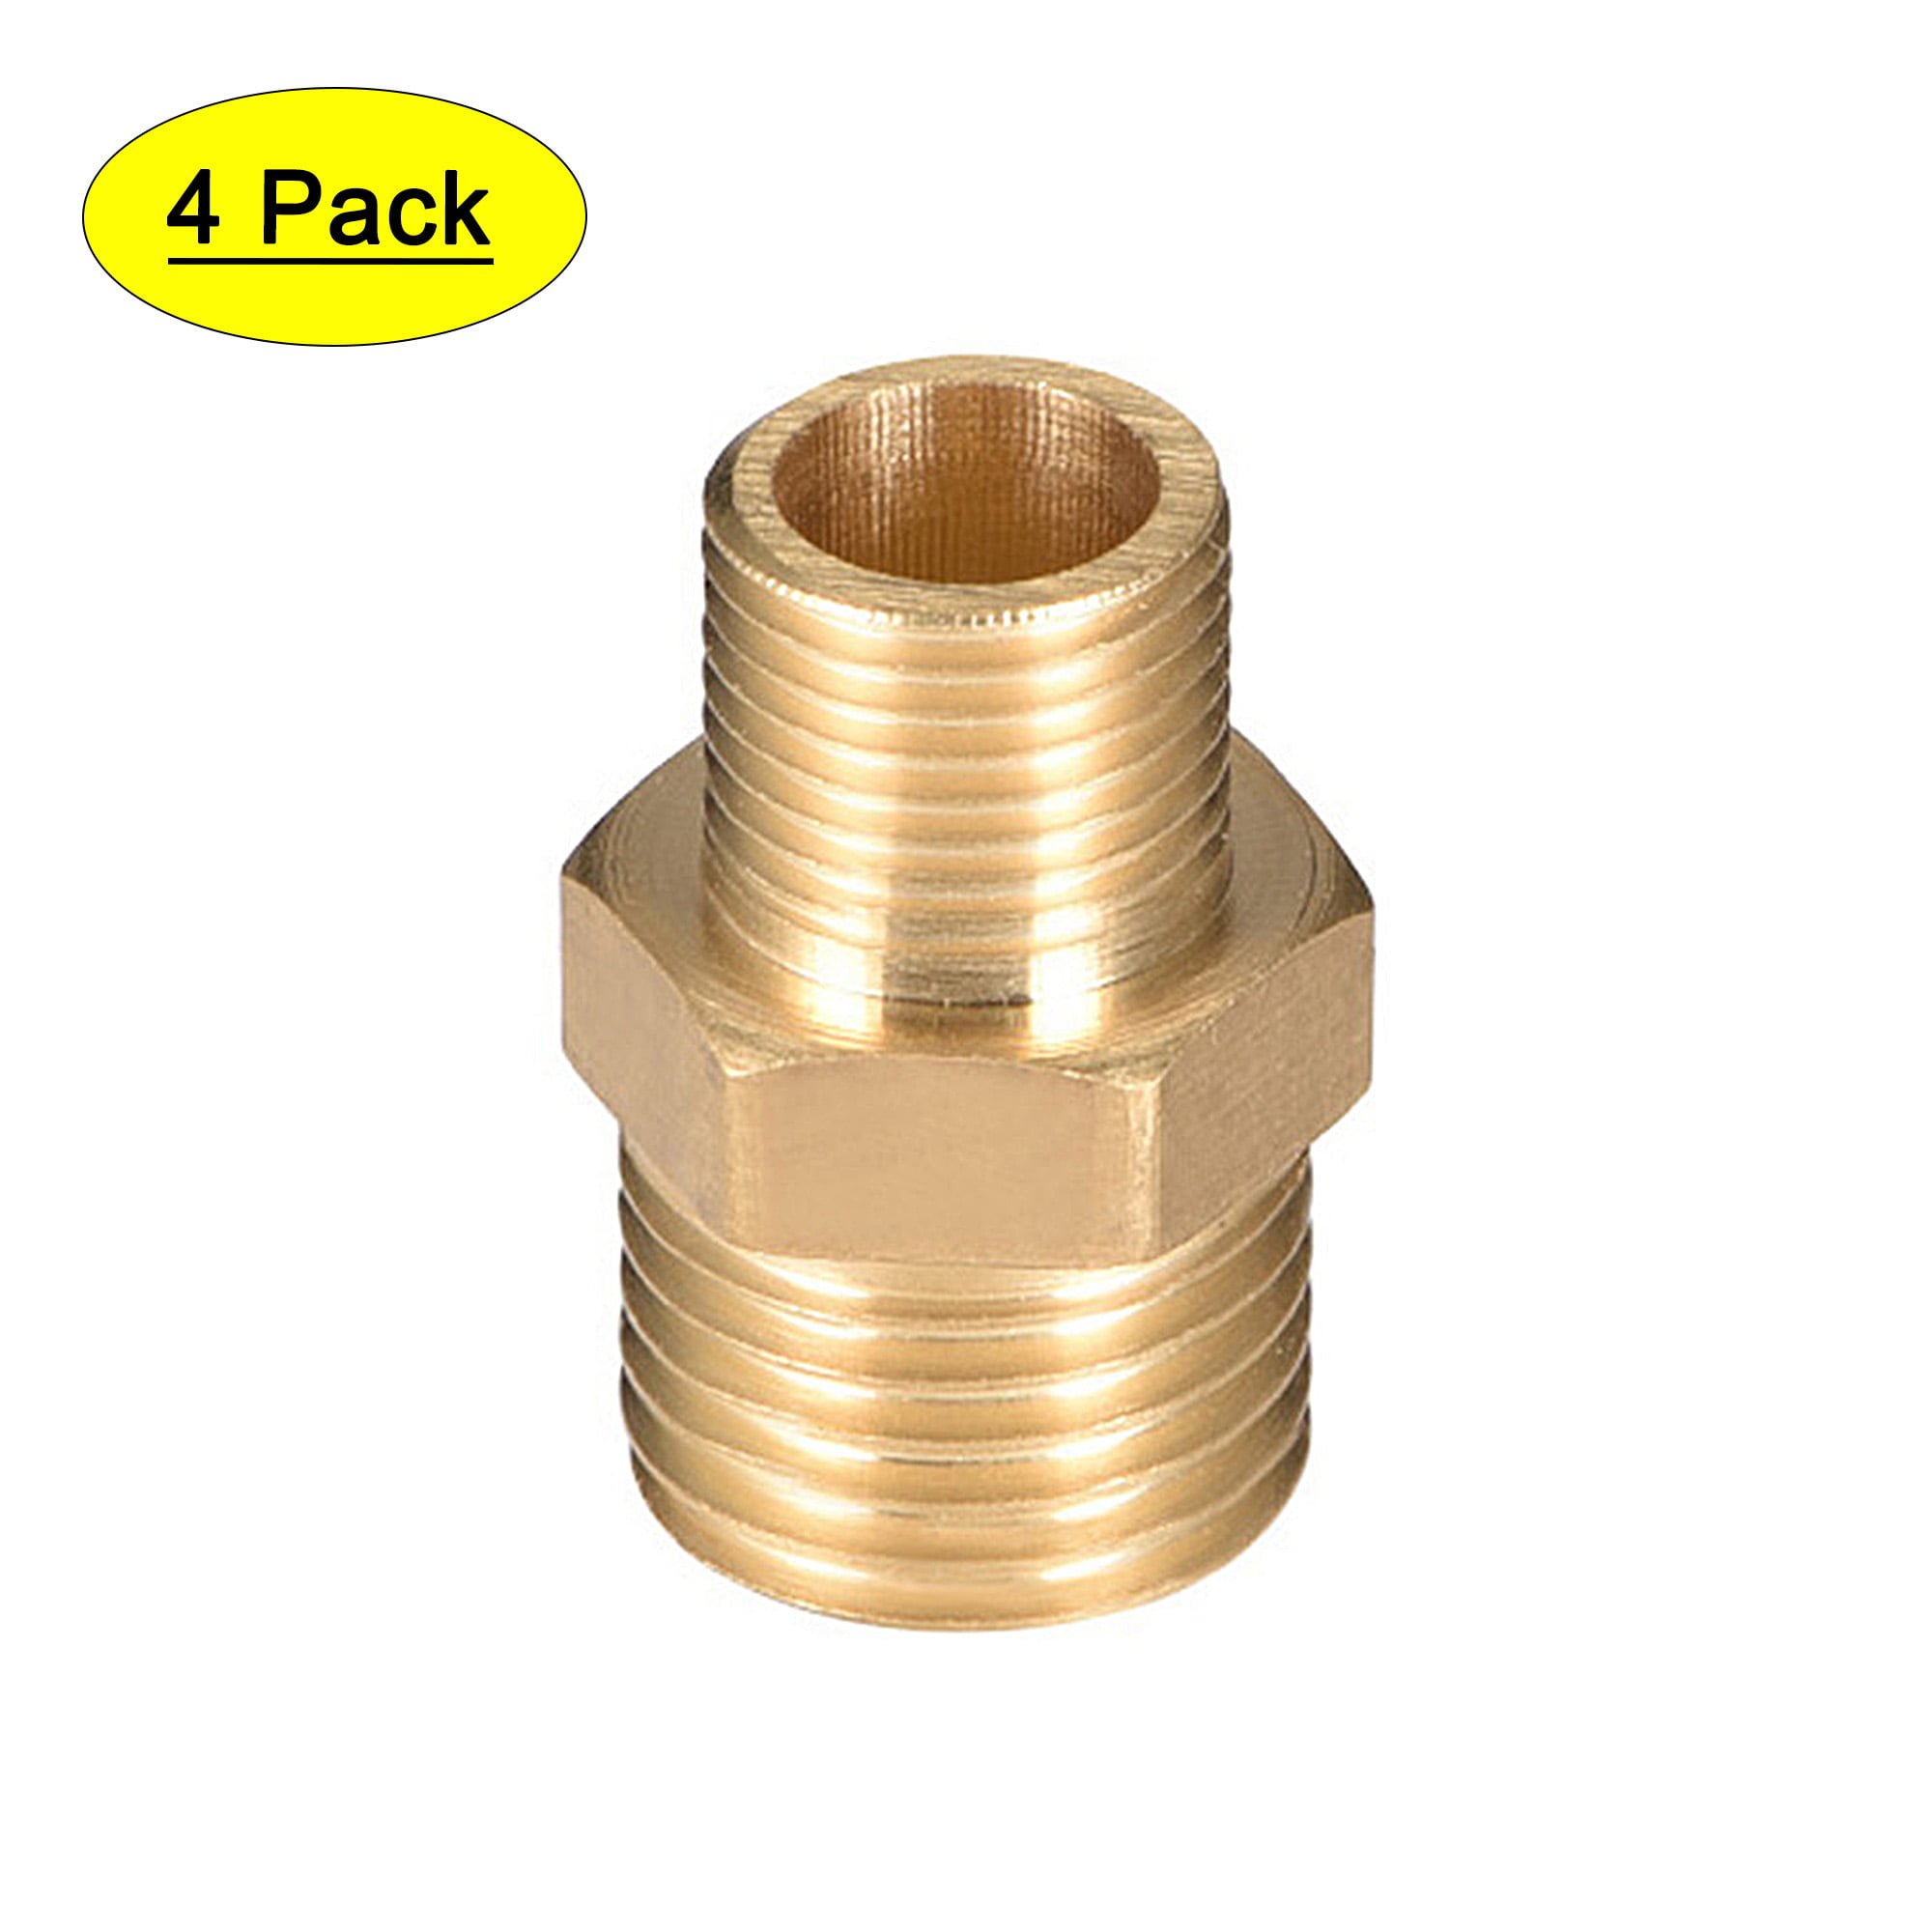 USA Solid Brass 3/8 NPT Brass Pipe Hex Nipple Fuel Water Air Brand New 